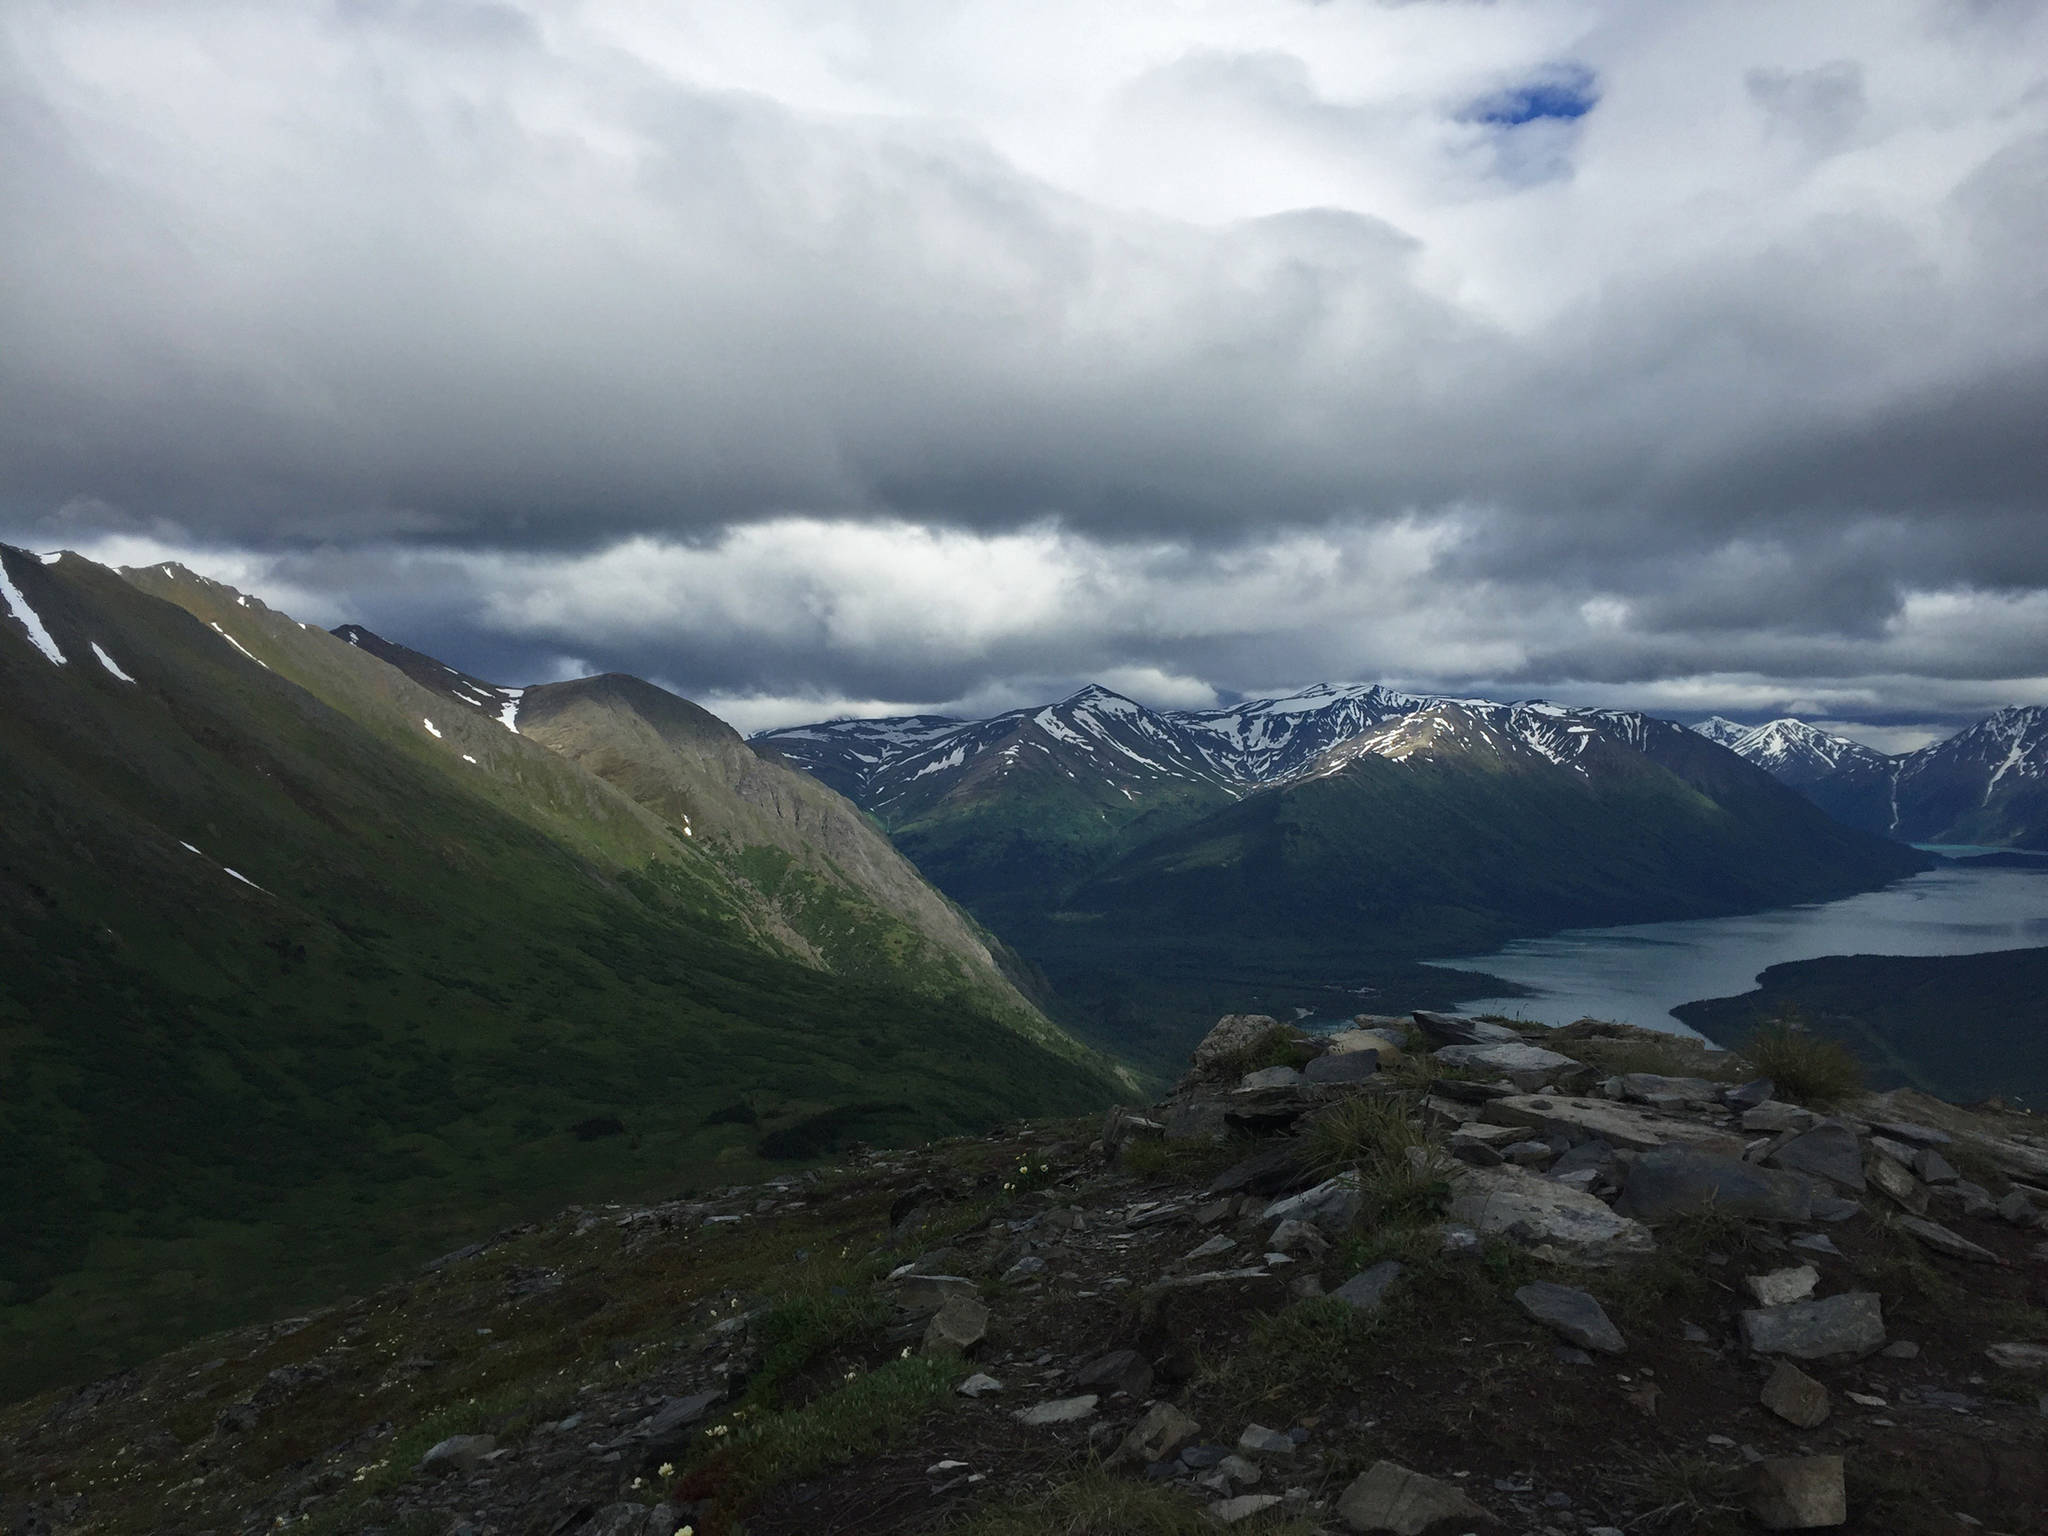 Clouds drift above the peak of Slaughter Ridge and Kenai Lake on Saturday, July 1, 2017 near Cooper Landing, Alaska. Southcentral Alaska so far has had a cool, wet summer, and may see below-normal temperatures with above-normal precipitation over the next eight to 14 days, according to the U.S. Climate Prediction Center. Sunday was rainy on the central peninsula, with temperatures hovering in the mid-50s. However, the sun is predicted to make a steadier appearance for the Fourth of July week, with temperatures rising to the low 60s by Tuesday and some sunshine, according to a Special Weather Statement from the National Weather Service. “The warm and mostly dry weather pattern looks like it will hold through at least the end of the week,” the announcement states. “There may still be some afternoon and evening showers and thunderstorms forming on area mountains, but sunshine will be abundant for the valleys.” (Photo by Elizabeth Earl/Peninsula Clarion)